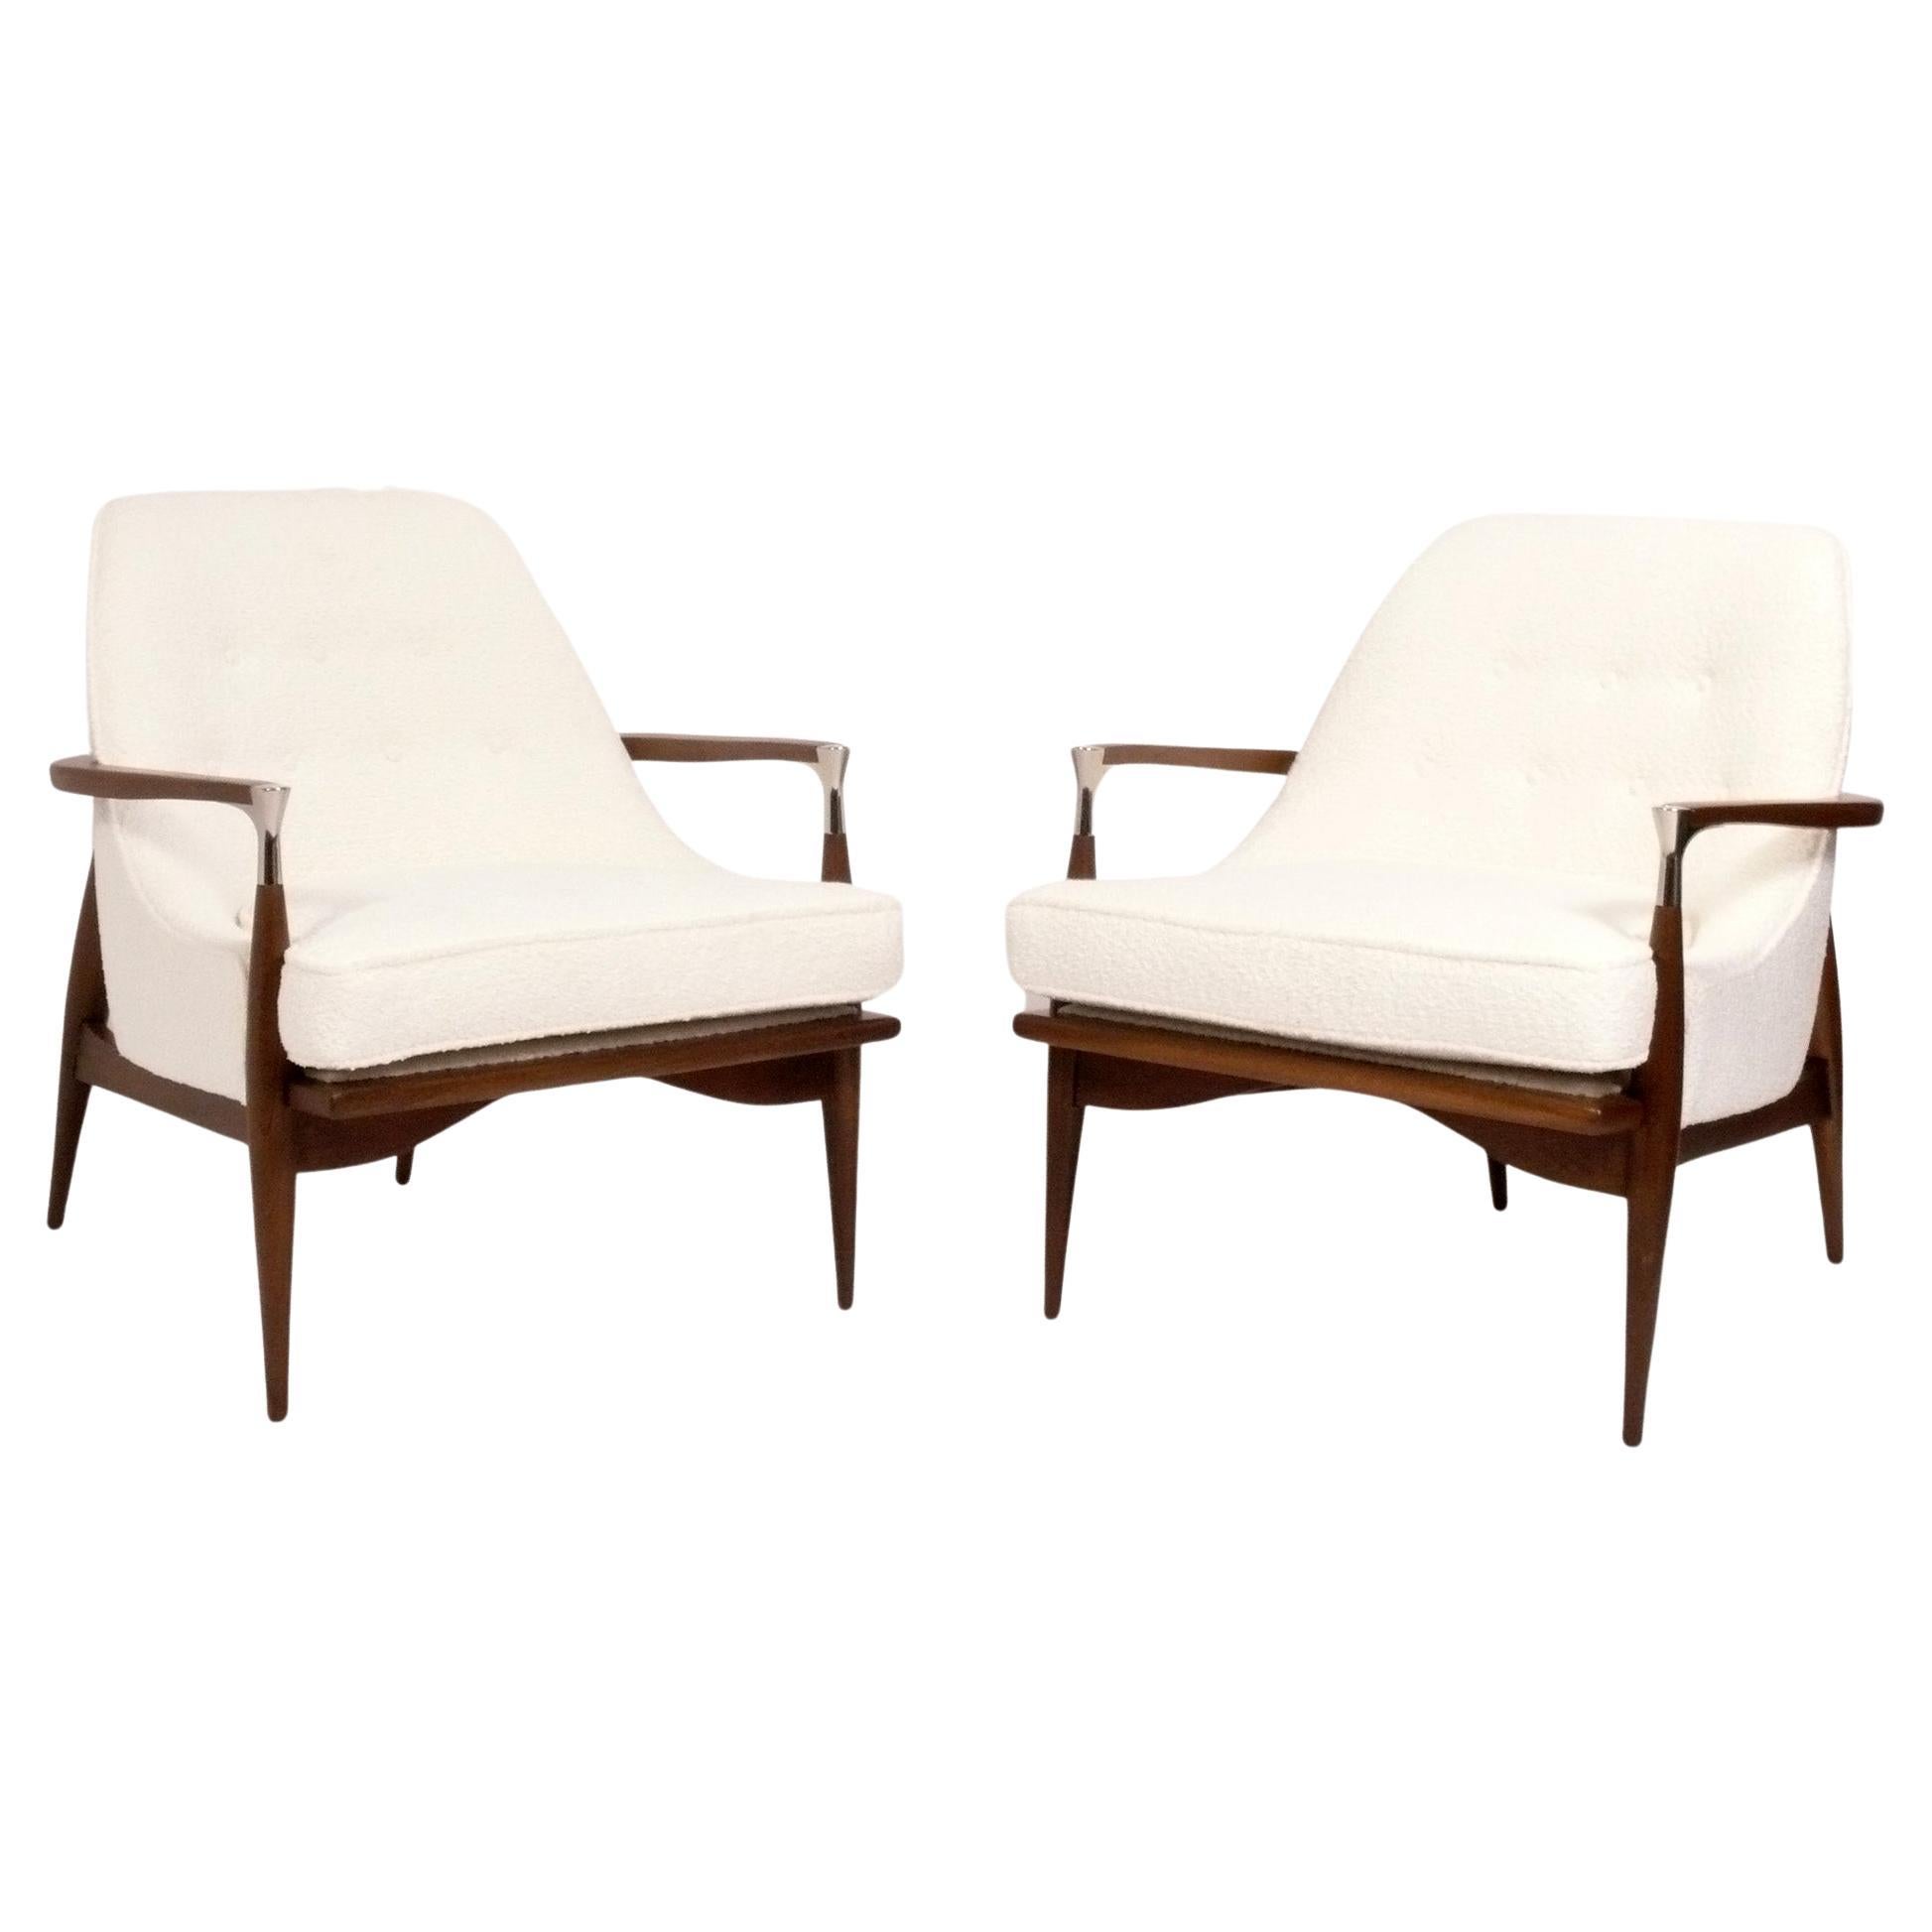 Ib Kofod Larsen Style Lounge Chairs Refinished & Reupholstered in Ivory Boucle 